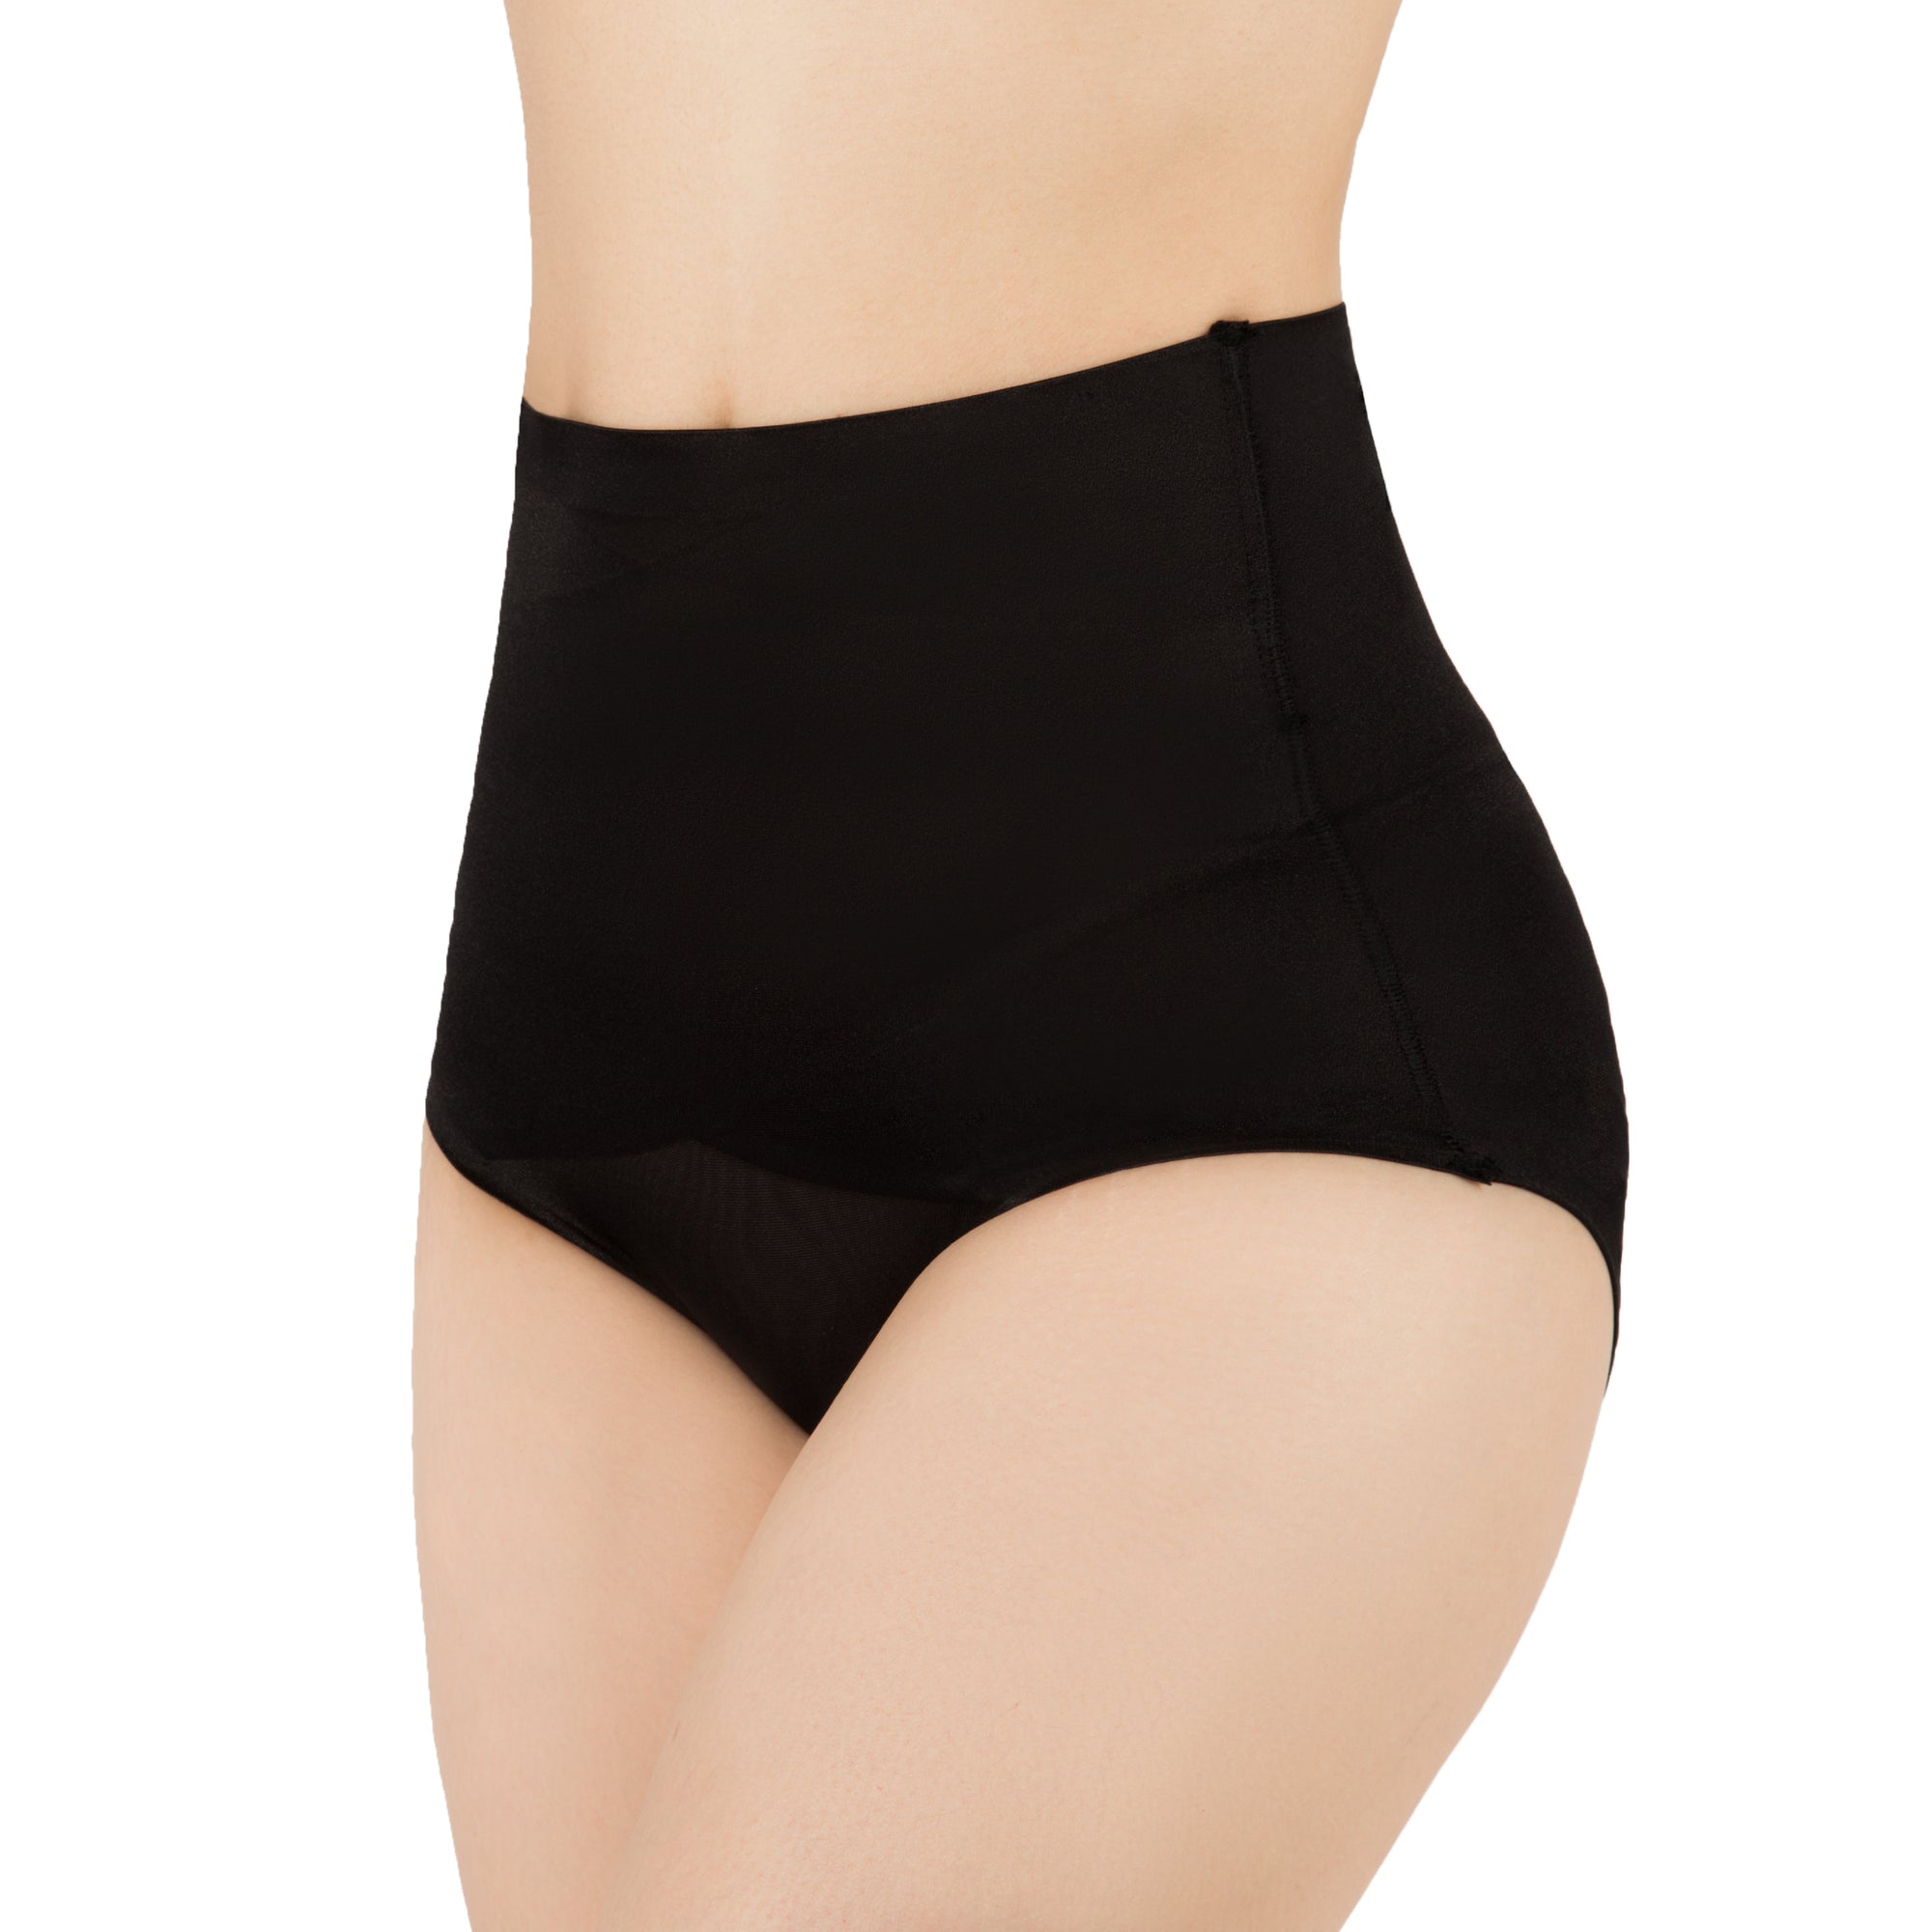 Lacy Underwear Panty Q1 in Nairobi Central - Clothing, Absolute Shapewear